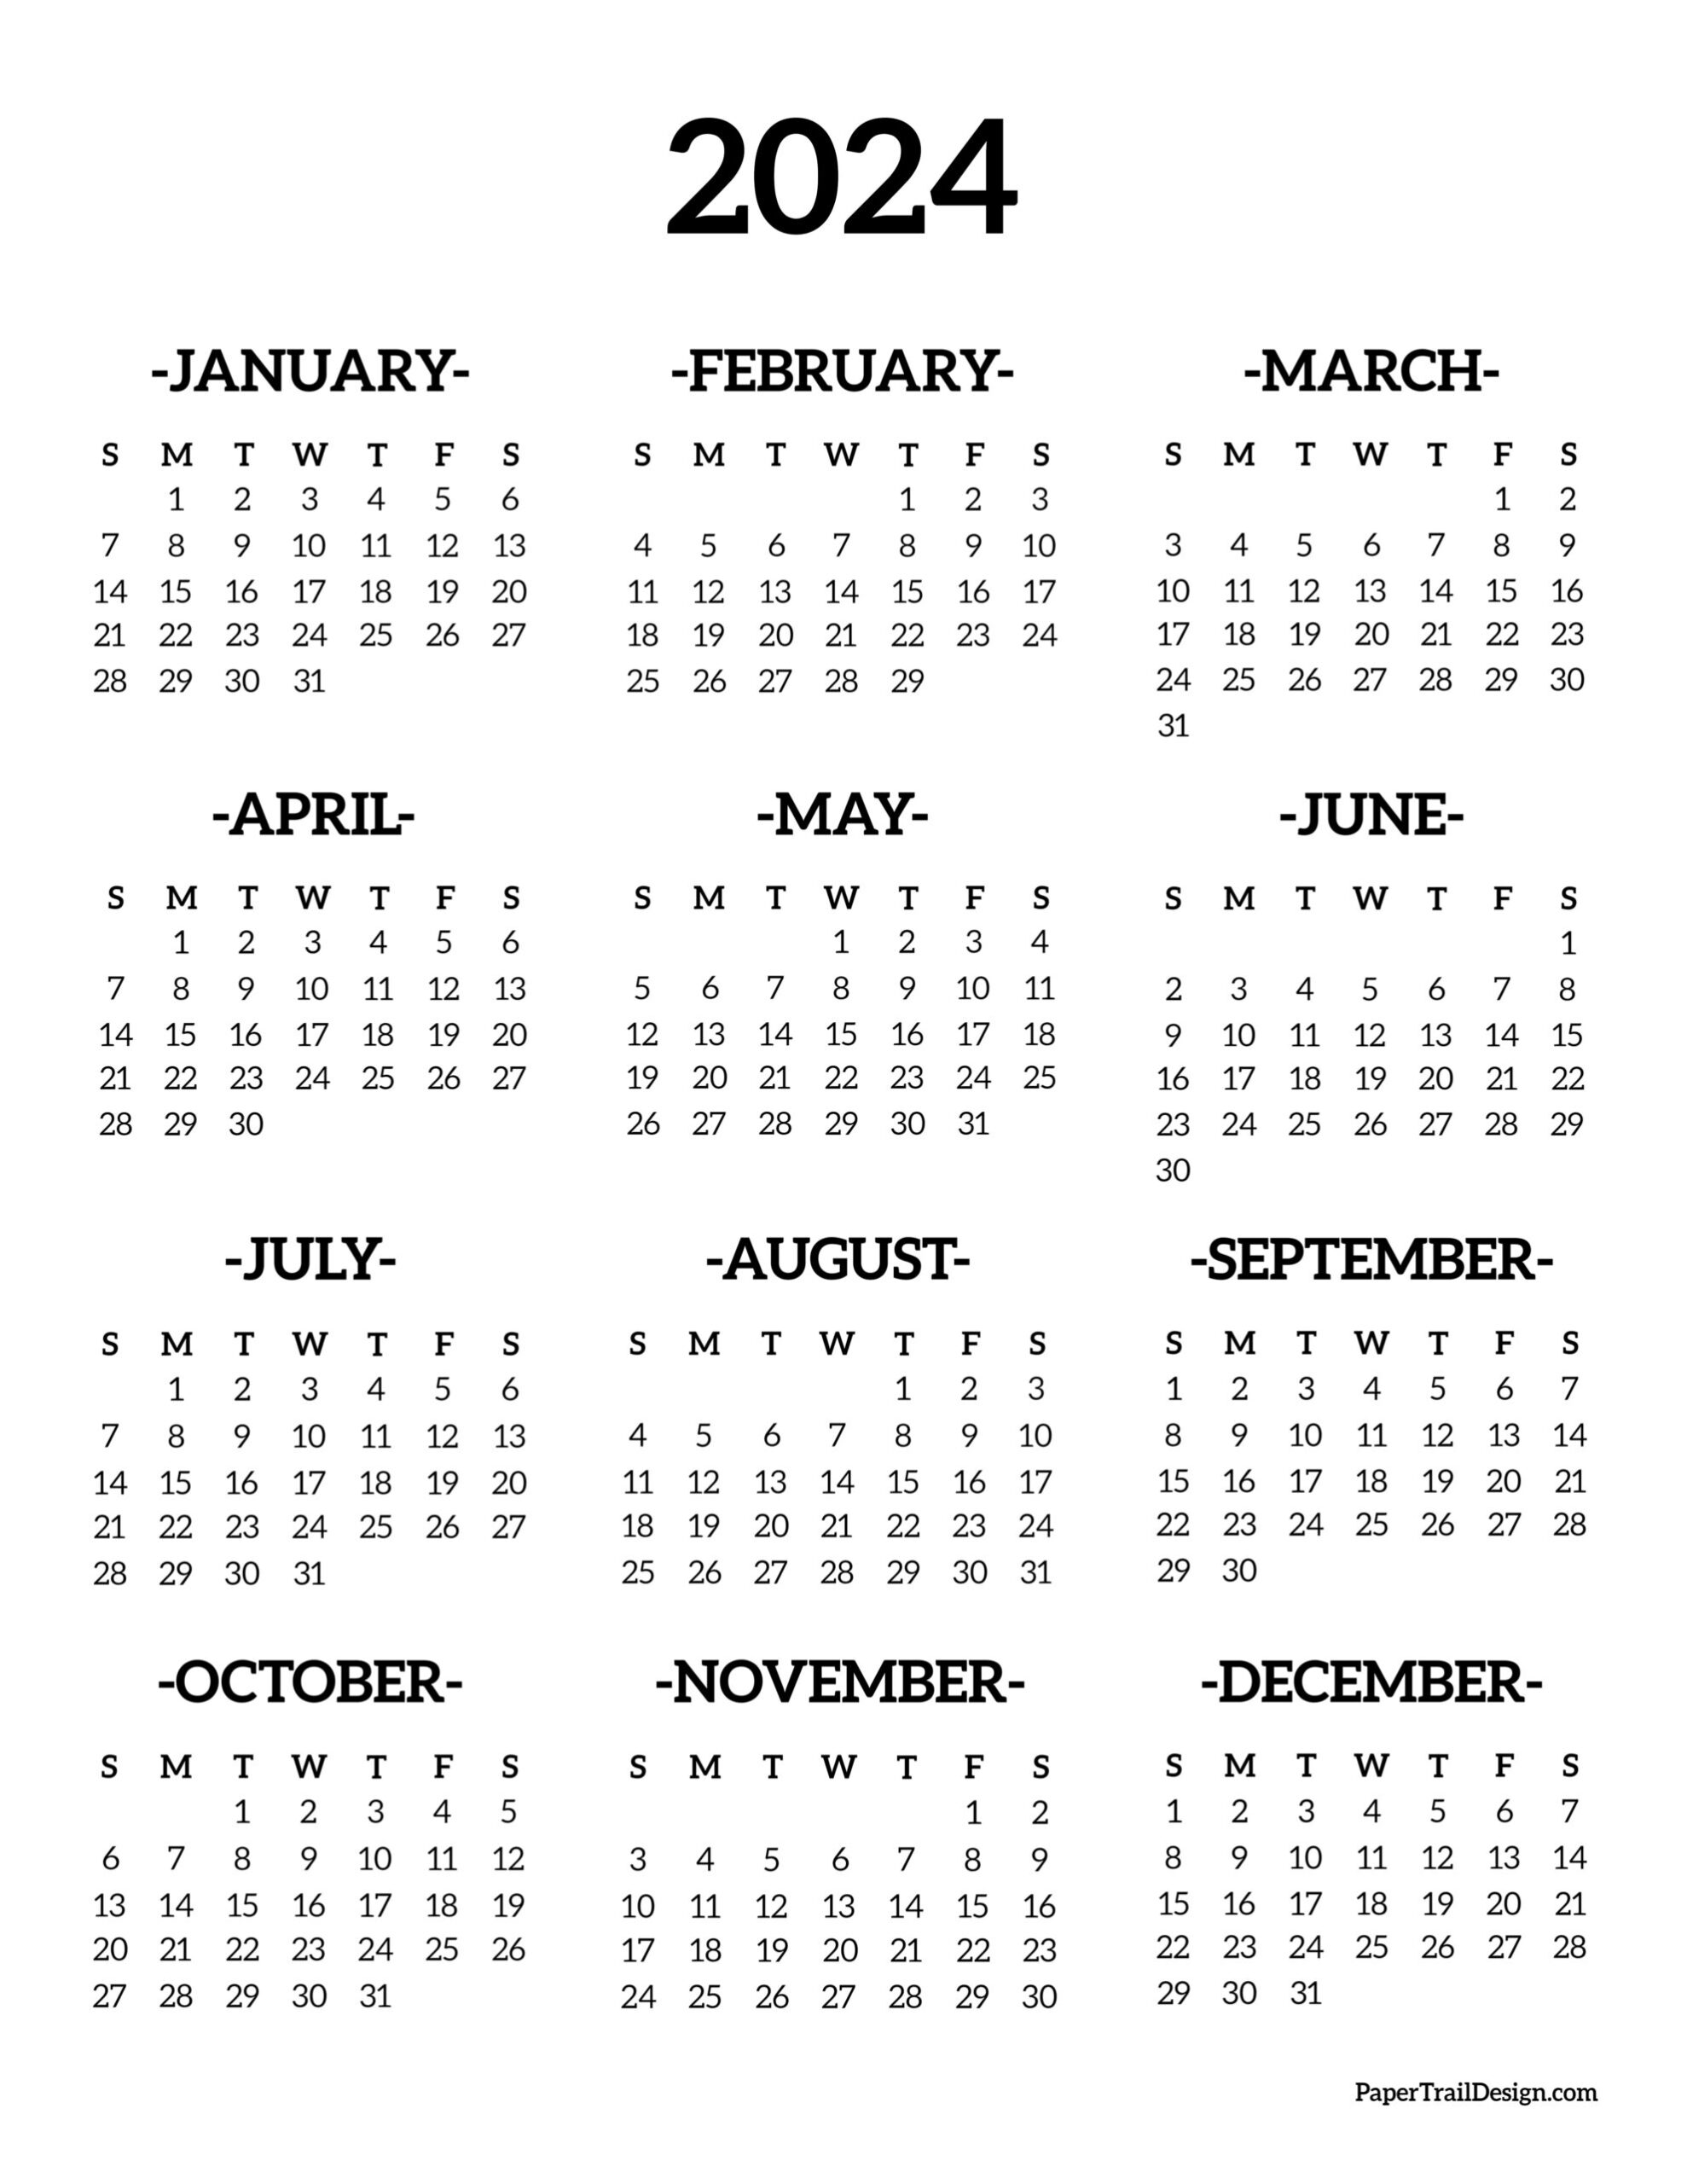 Calendar 2024 Printable One Page - Paper Trail Design for 2024 Year At A Glance Calendar Printable